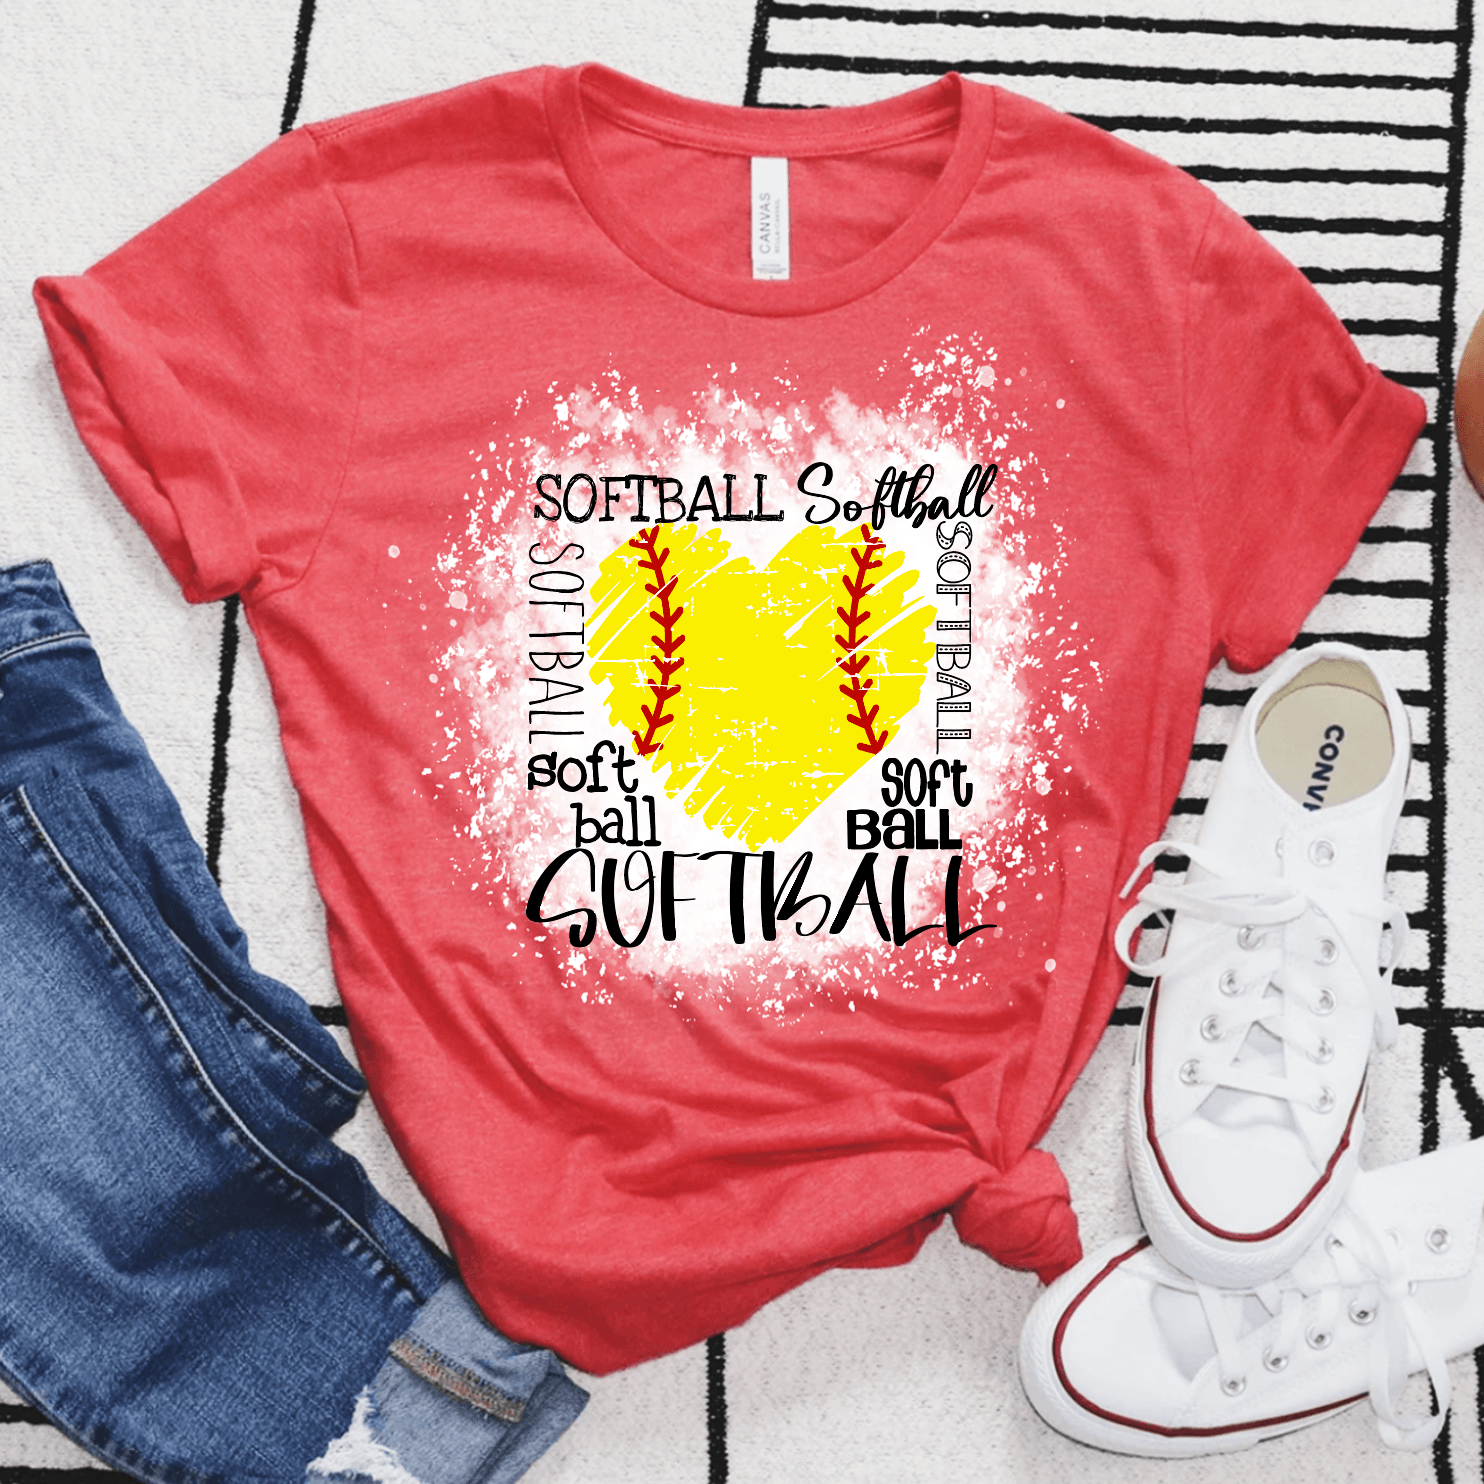 For the love of Softball🥎 - Signastyle Boutique